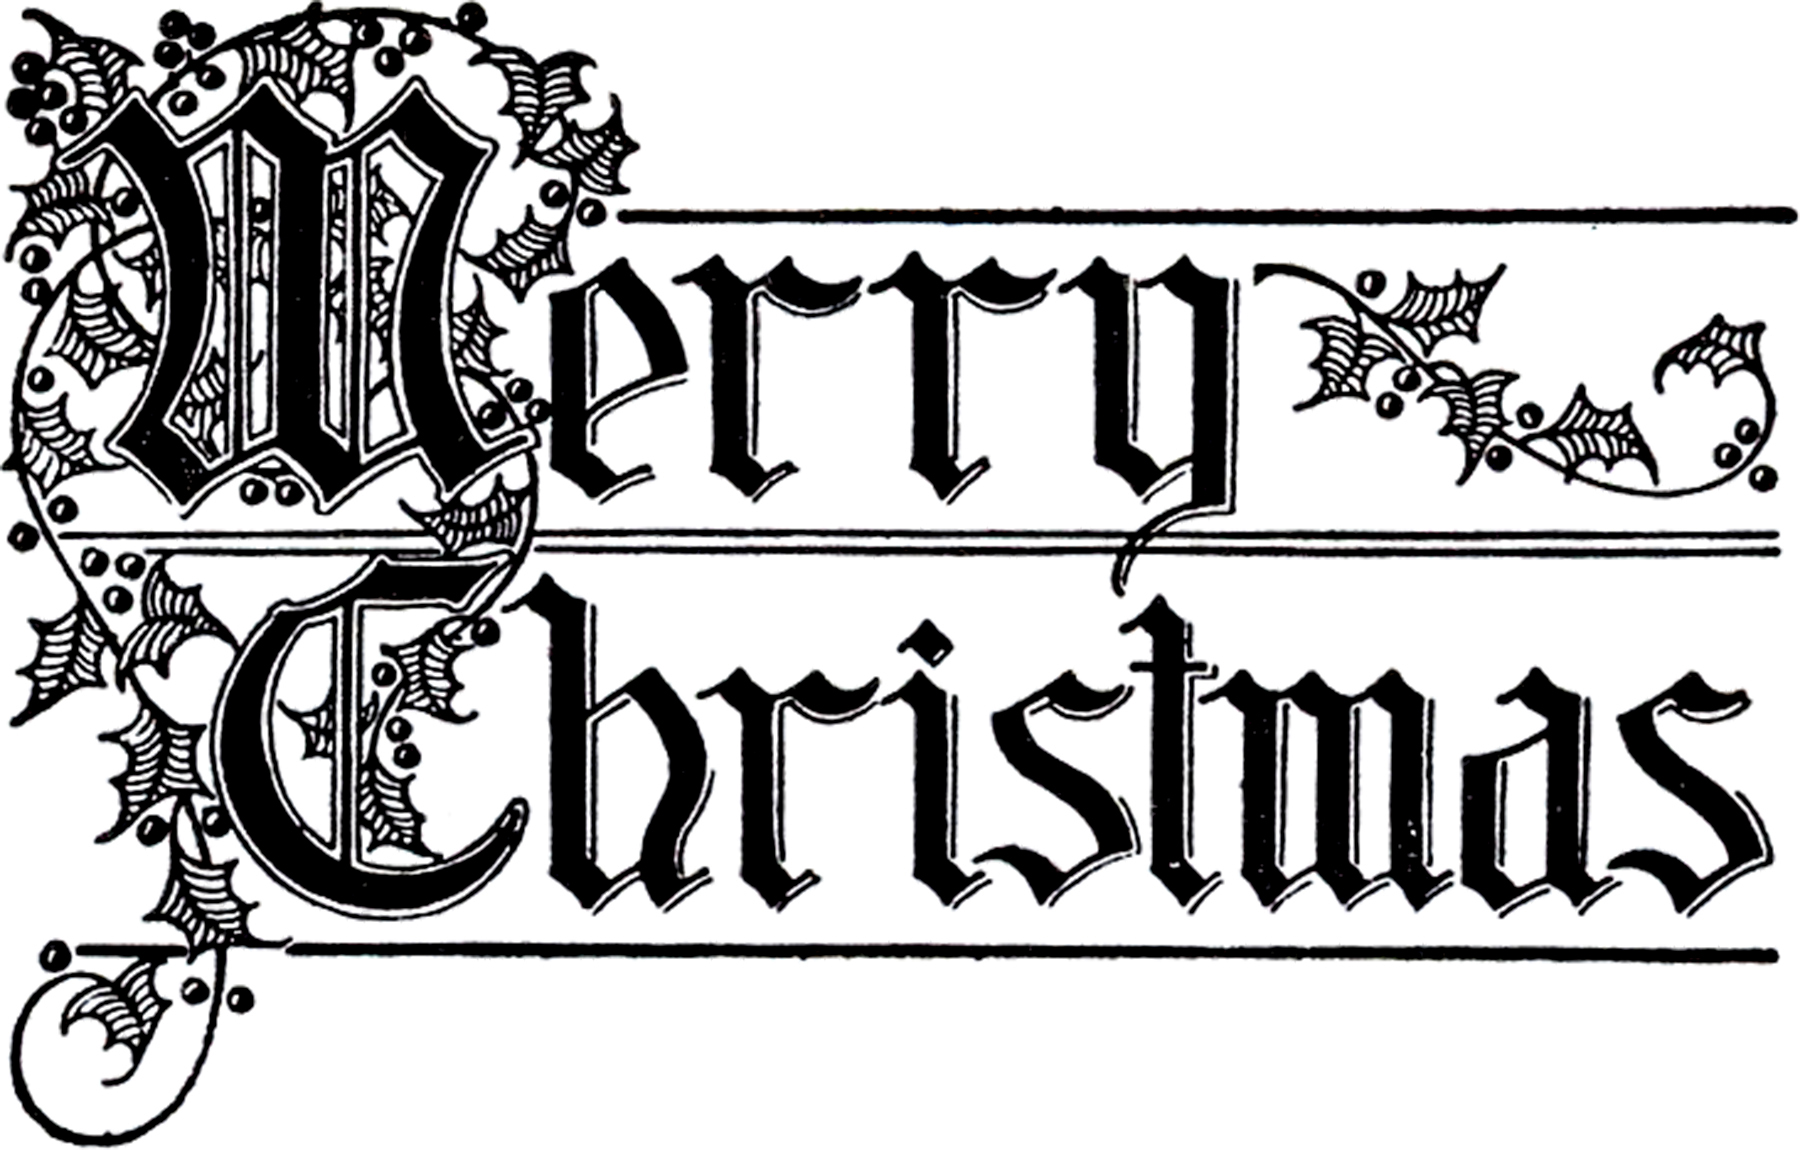 Merry Christmas Typography Image - Beautiful Lettering! - The Graphics Fairy